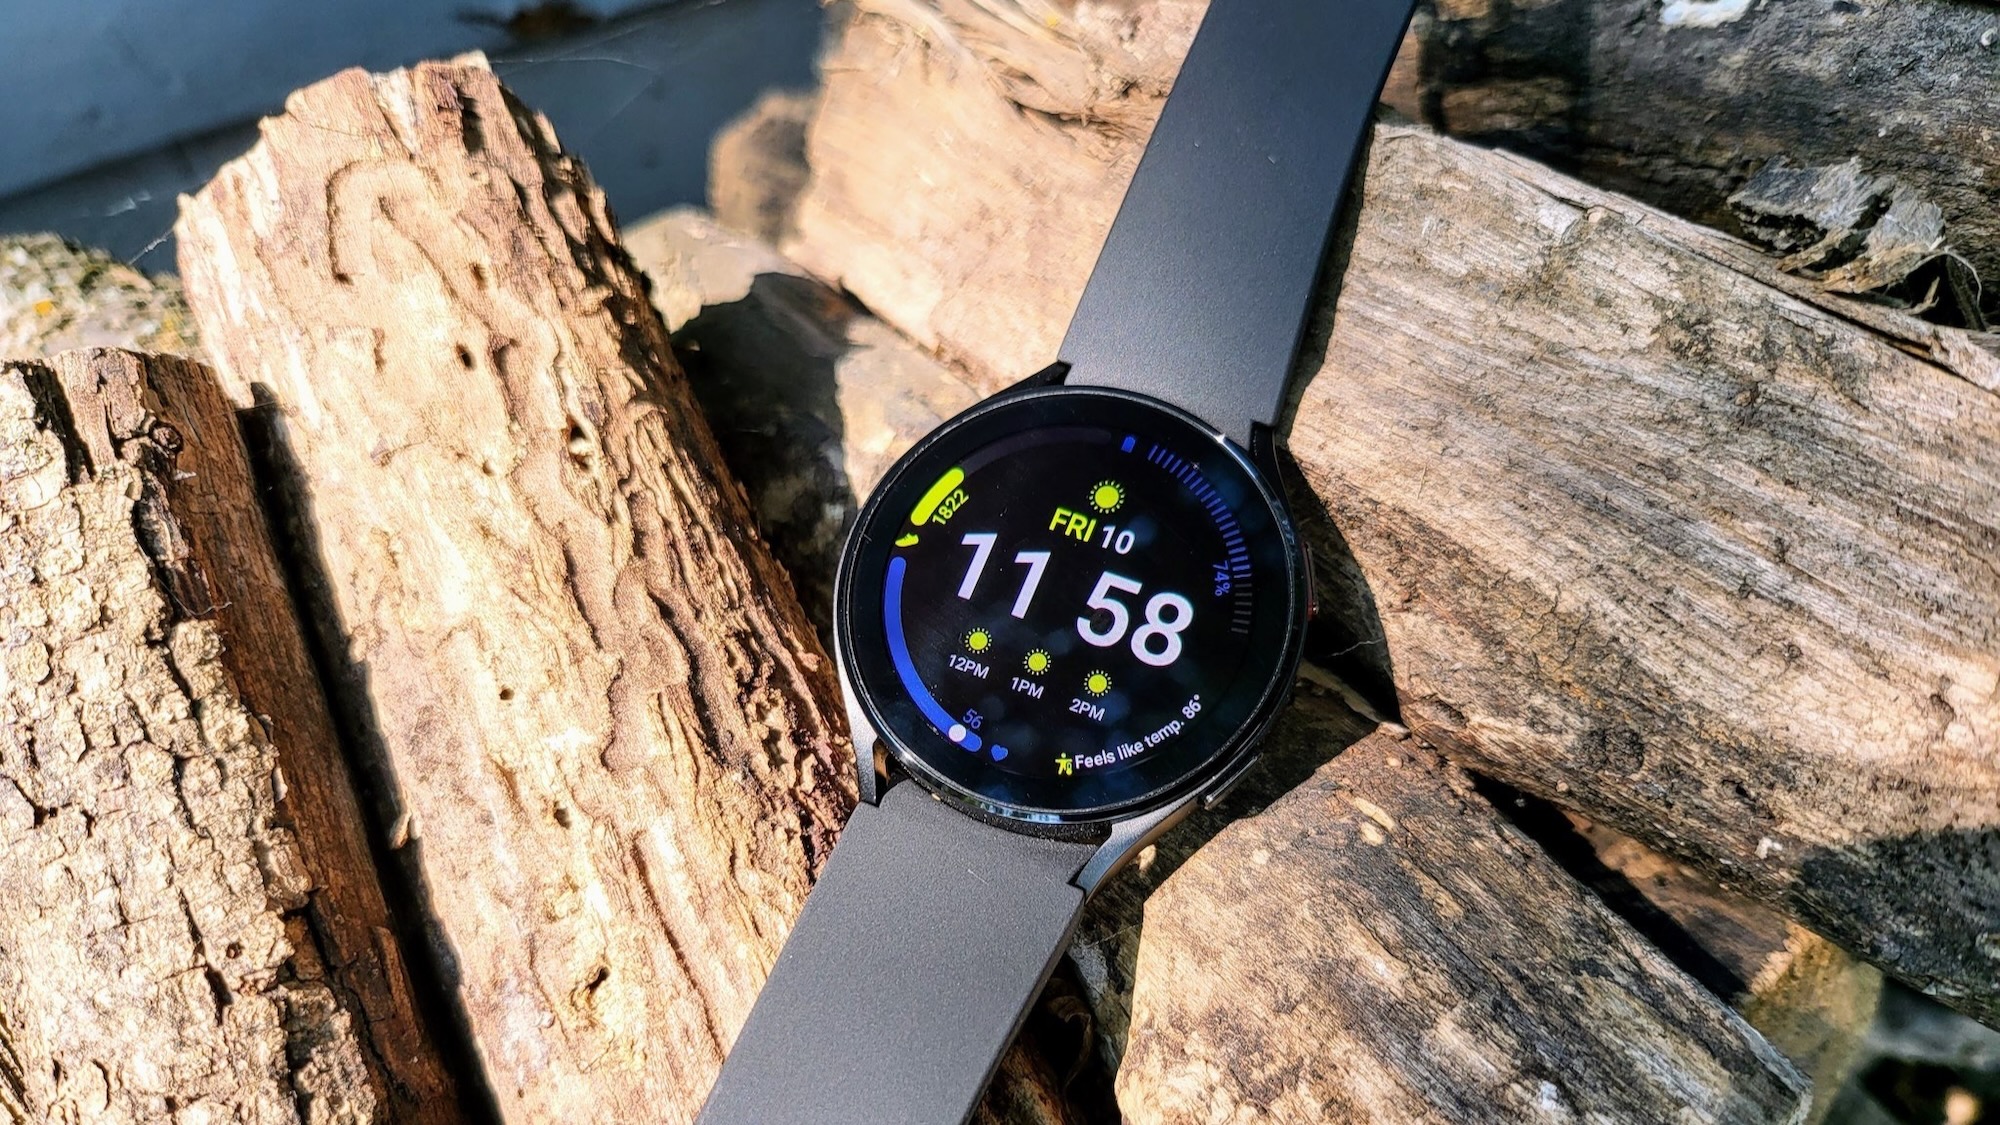 The Samsung Galaxy Watch 4 sitting on top of logs